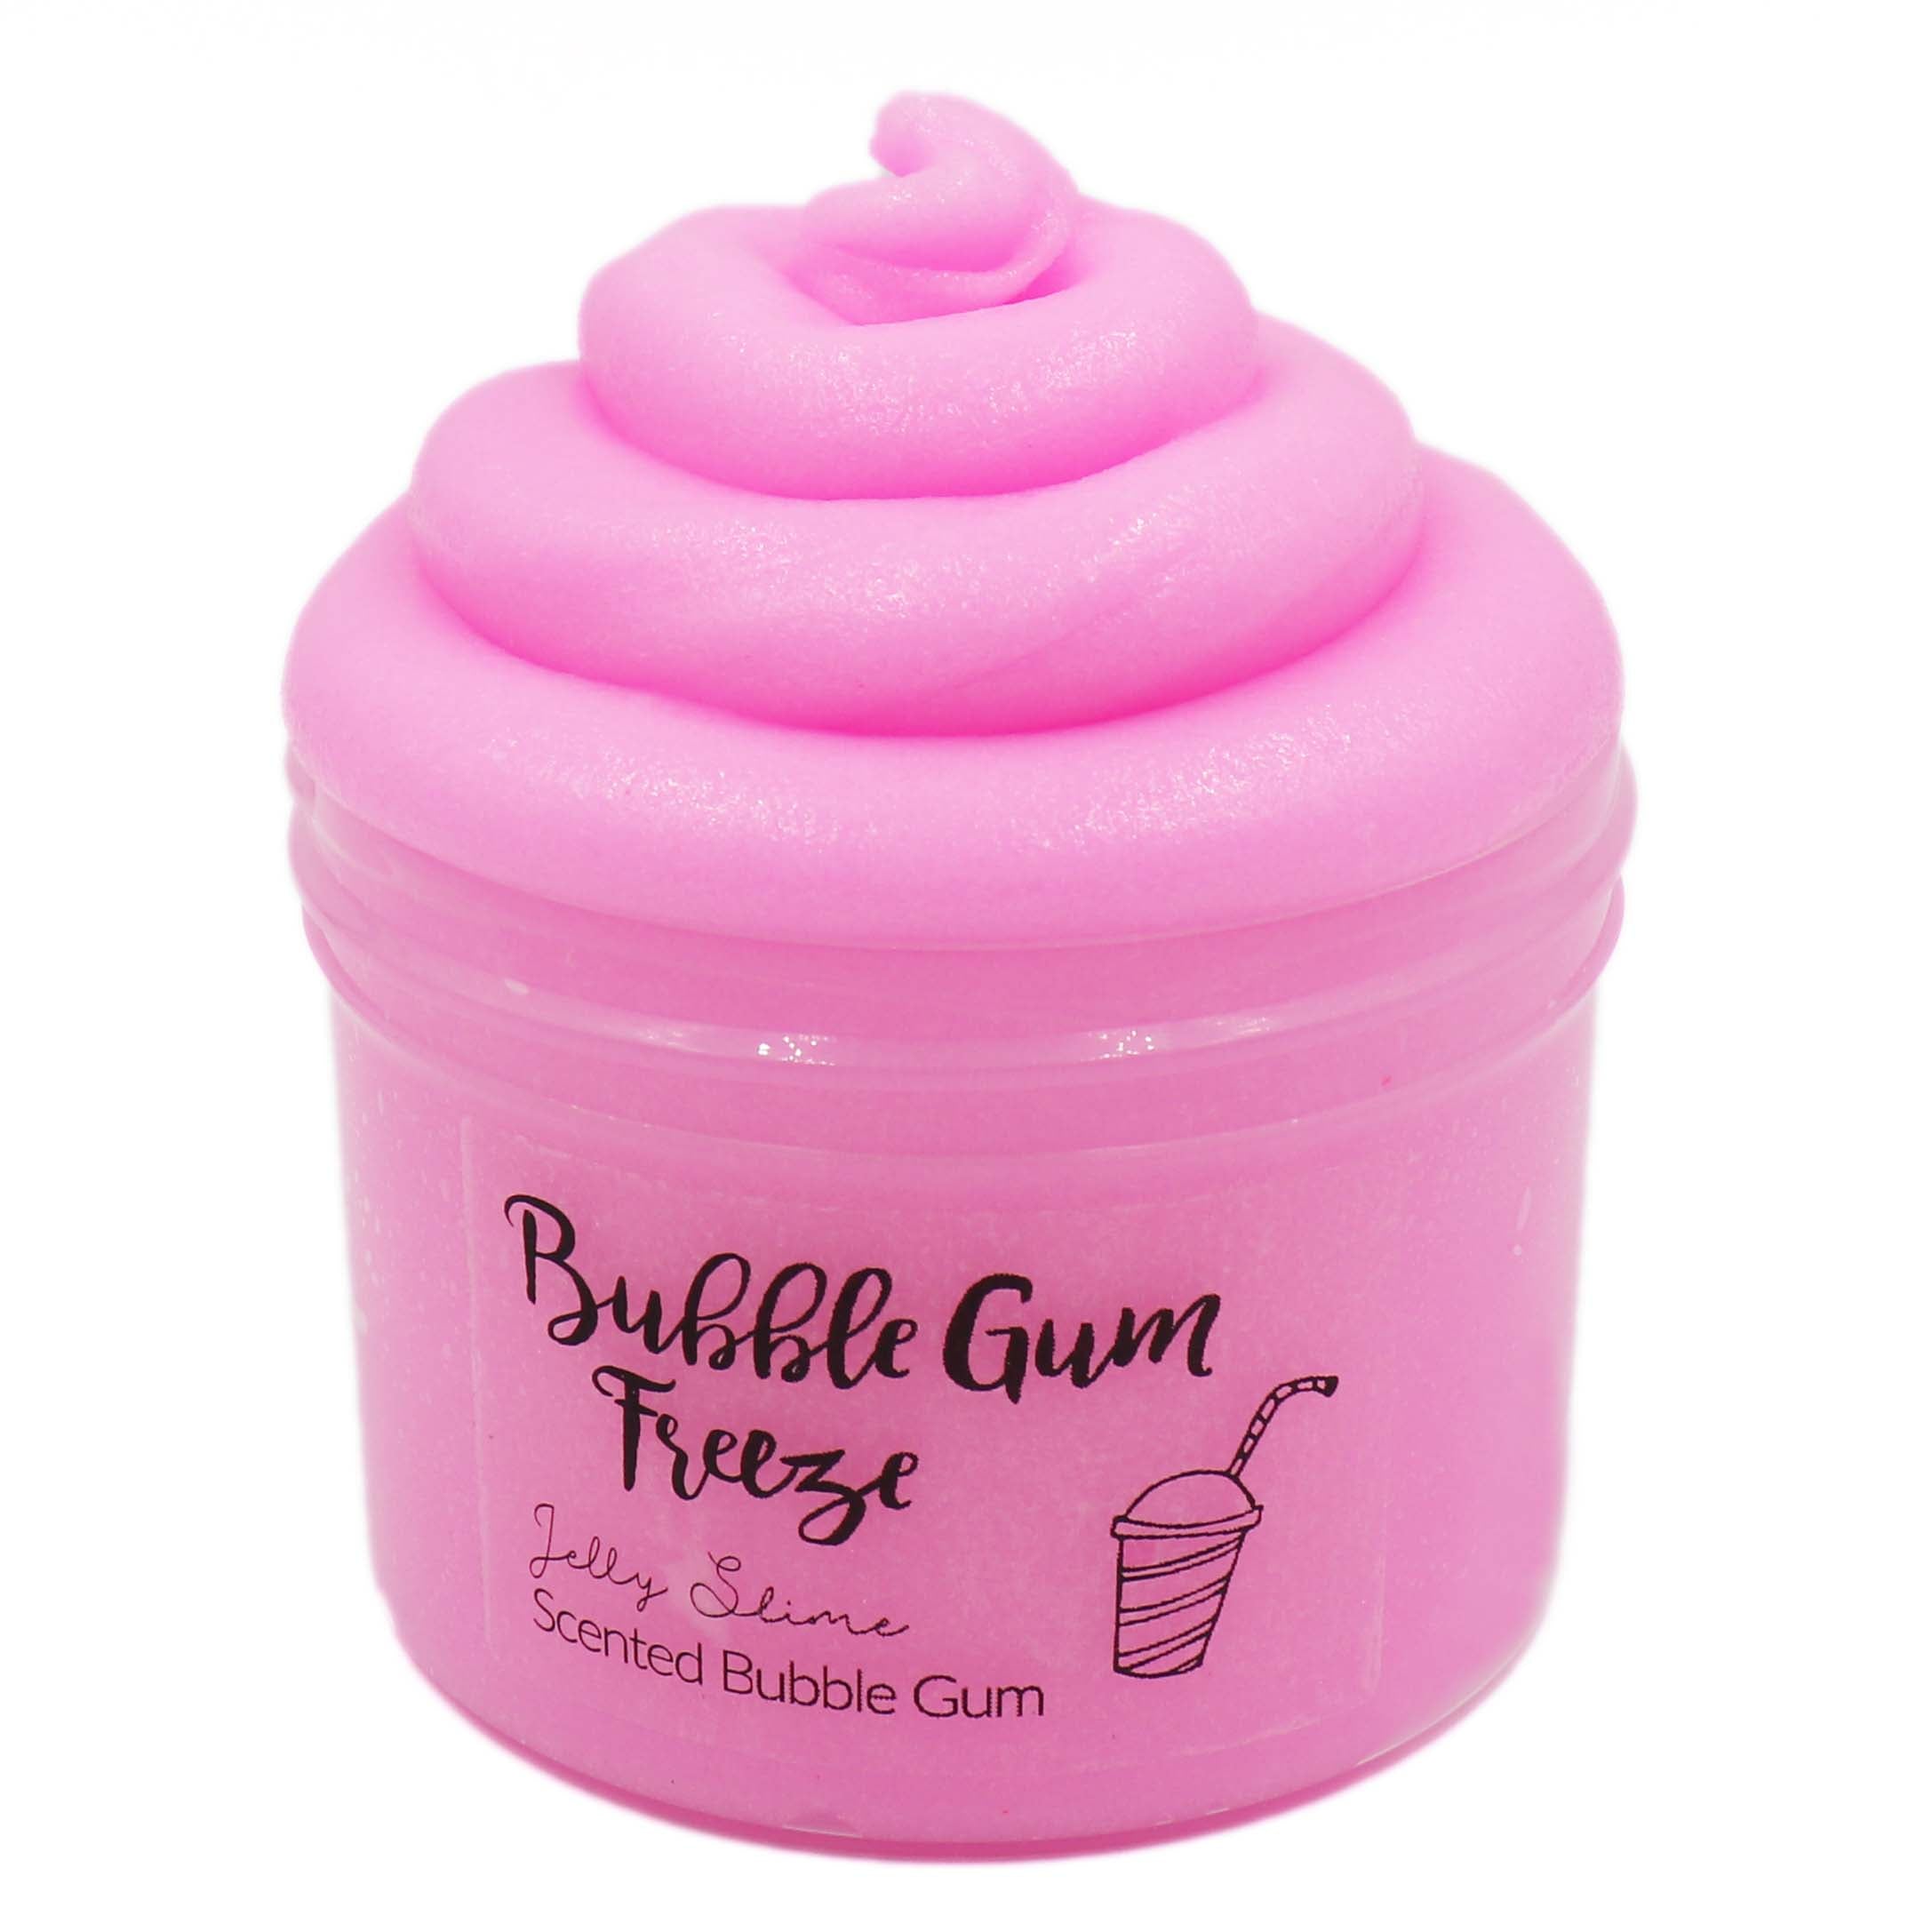 Bubble Gum Freeze Pink Jelly Slime Fantasies 8oz Front View